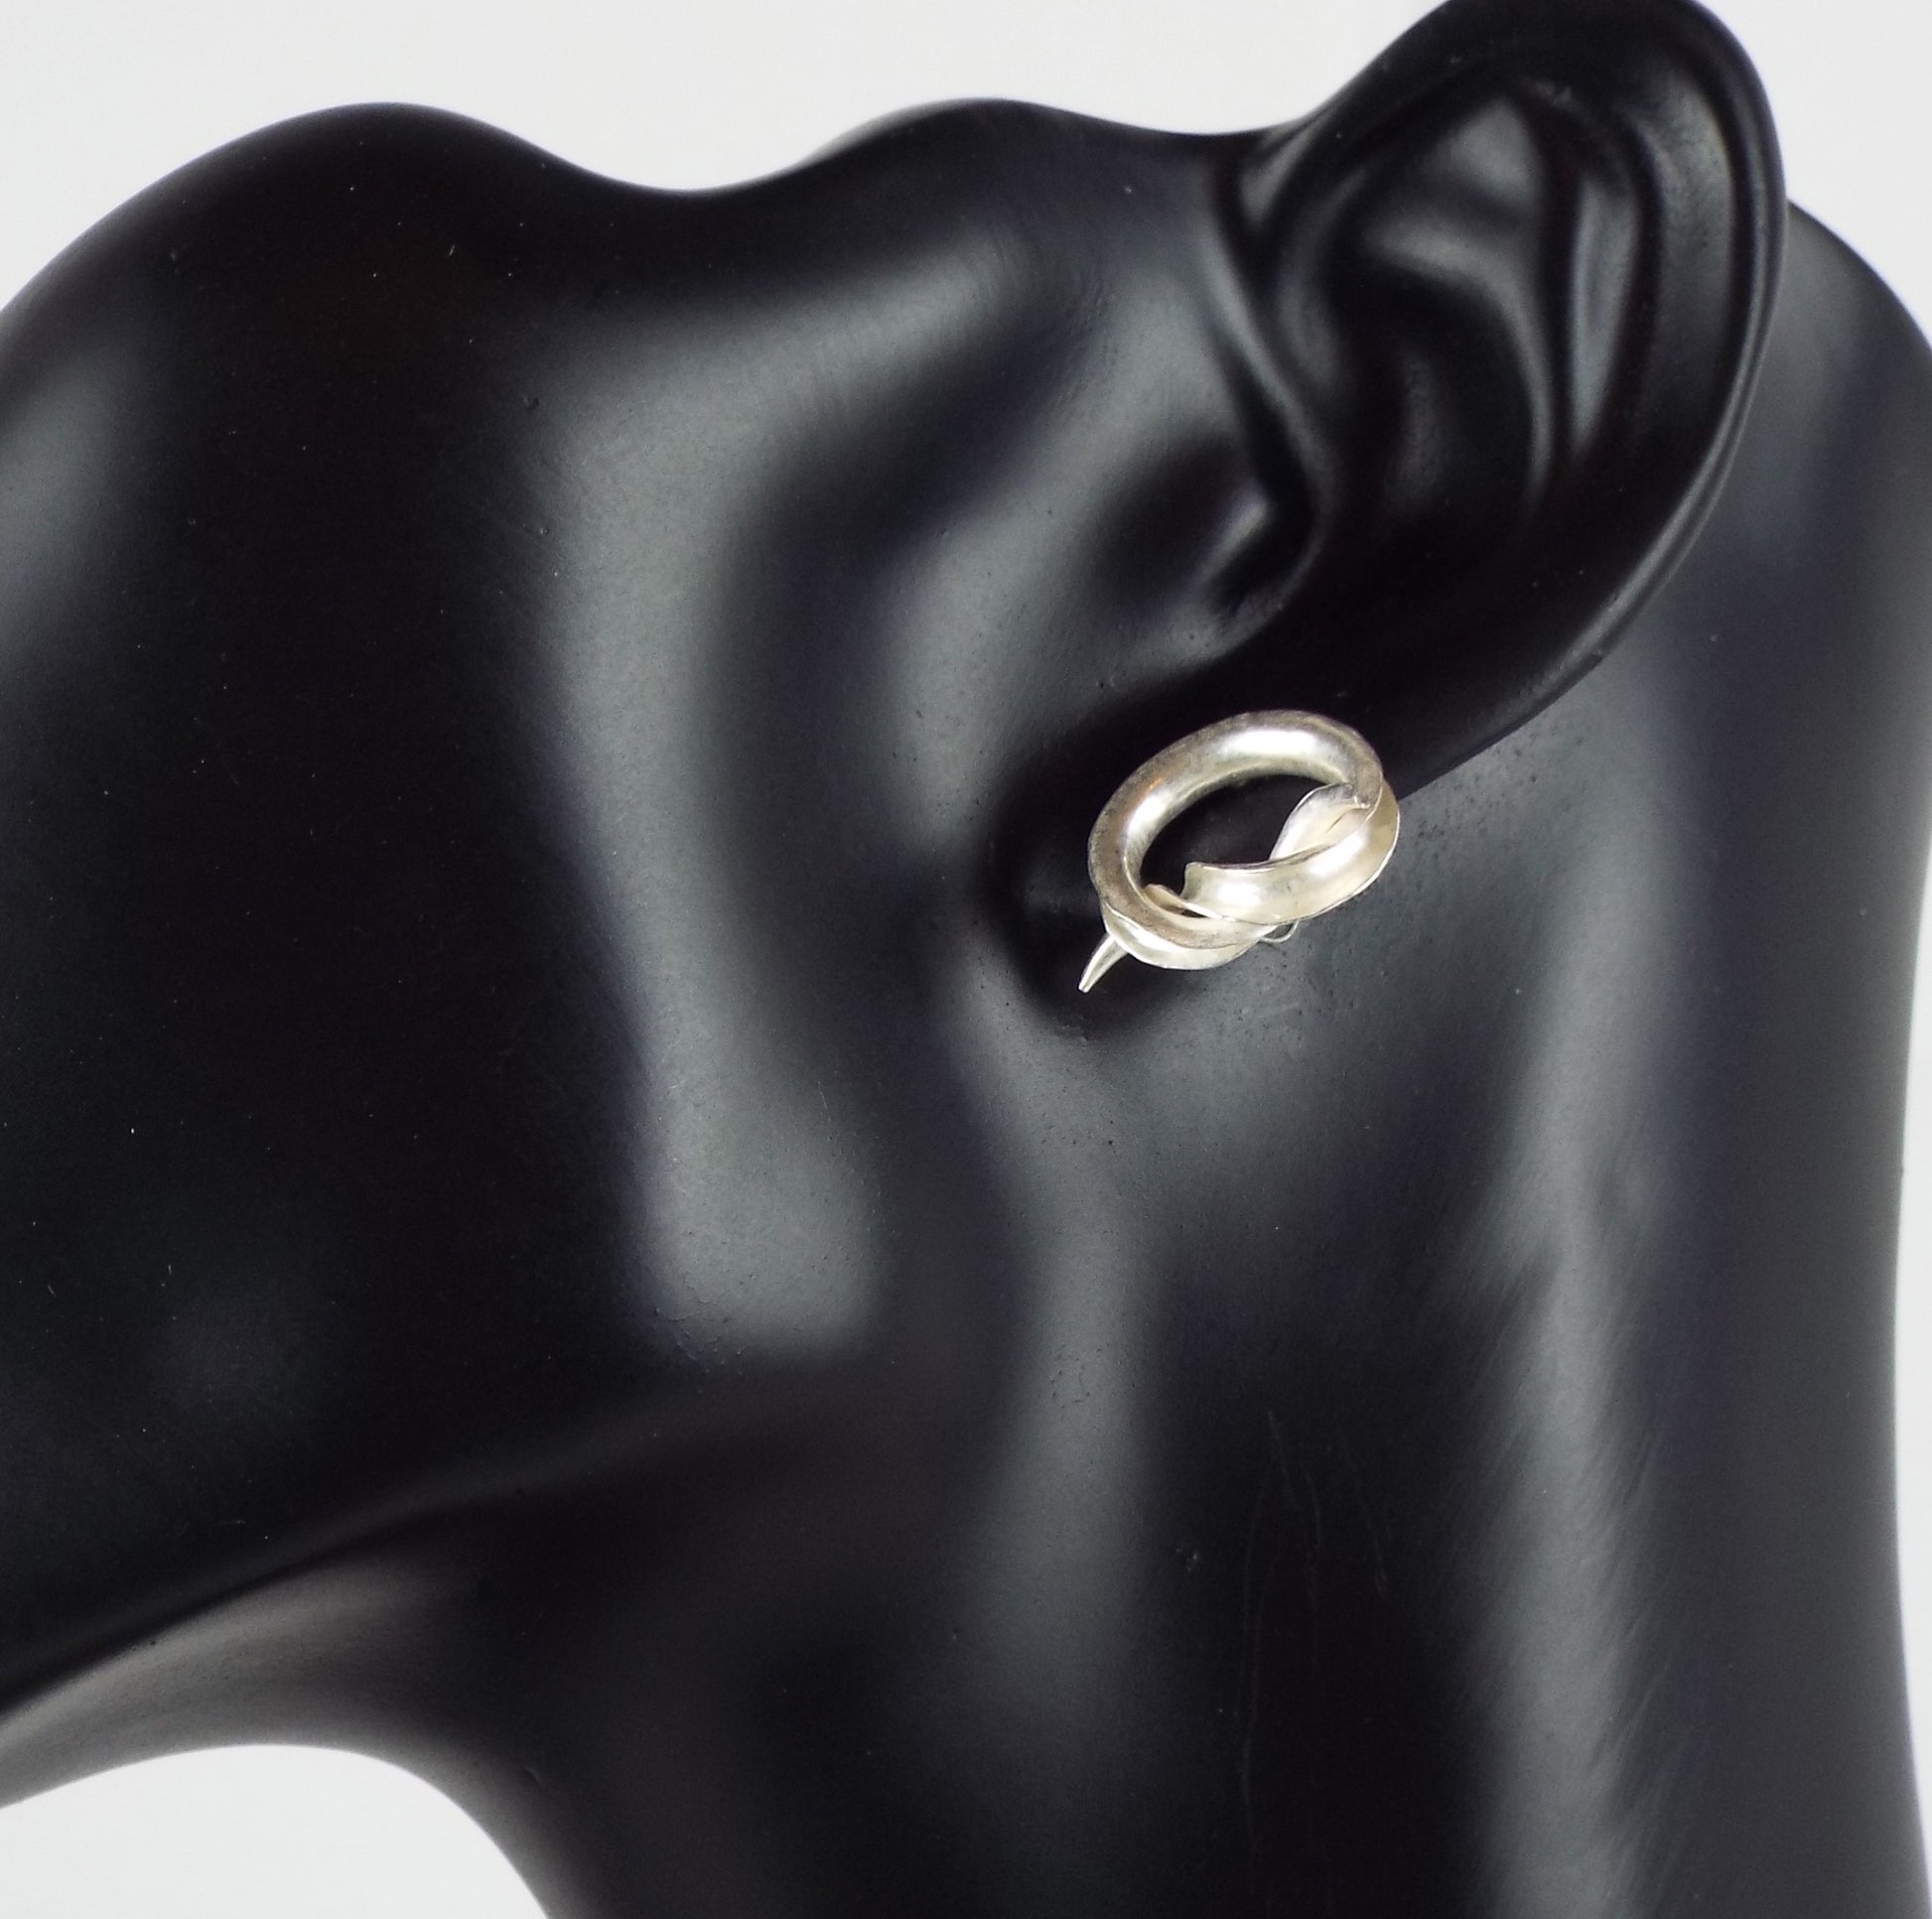 Celebrate tying the knot with a pair of mirror-image stud earrings, each in the form of an open-sided tube tied into a simple knot. Shown on a mannequin.